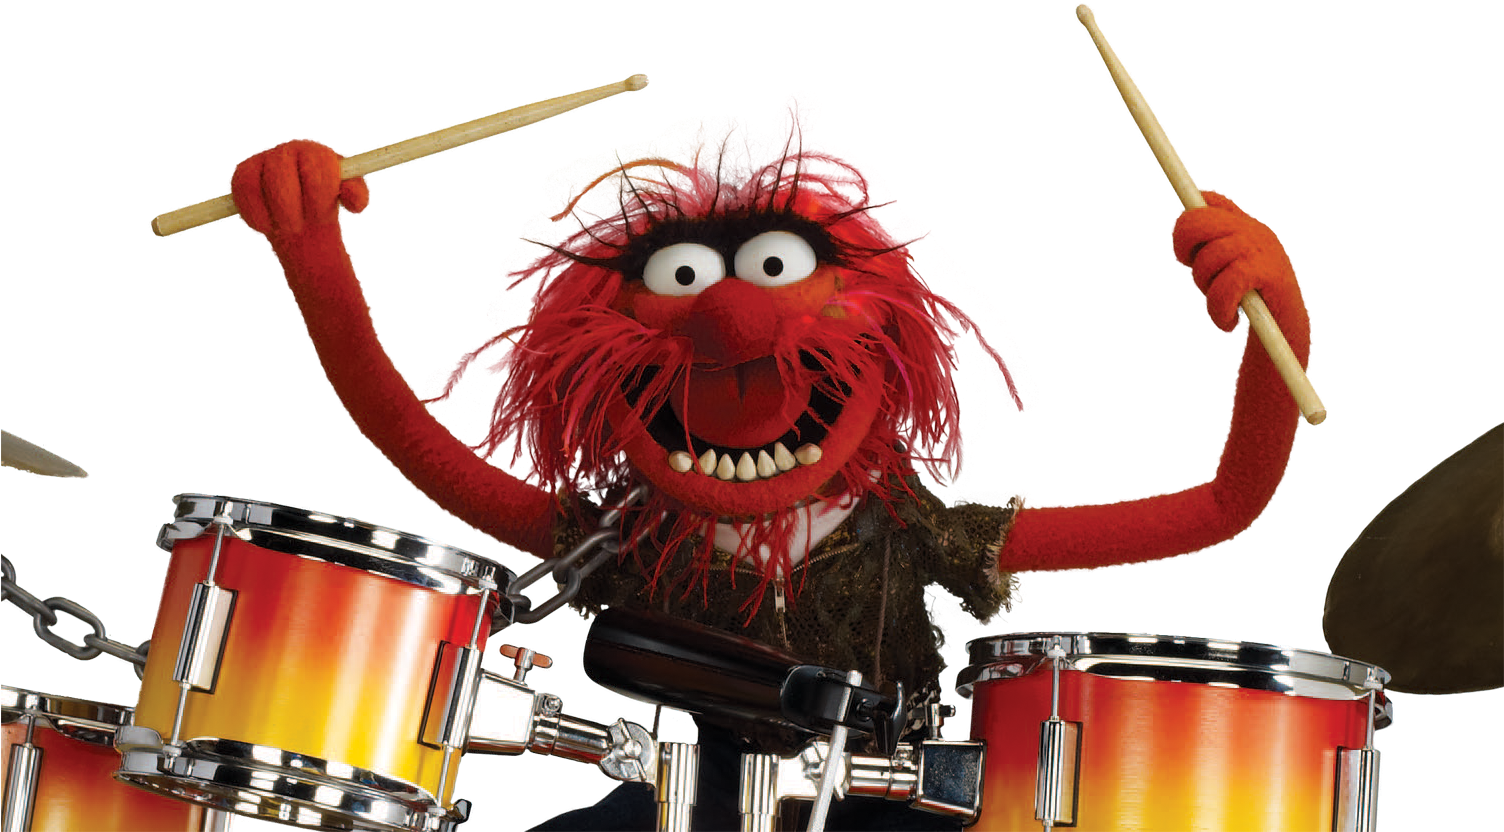 Muppets Studio Clip Art - Animal Muppets, Find more high quality free trans...